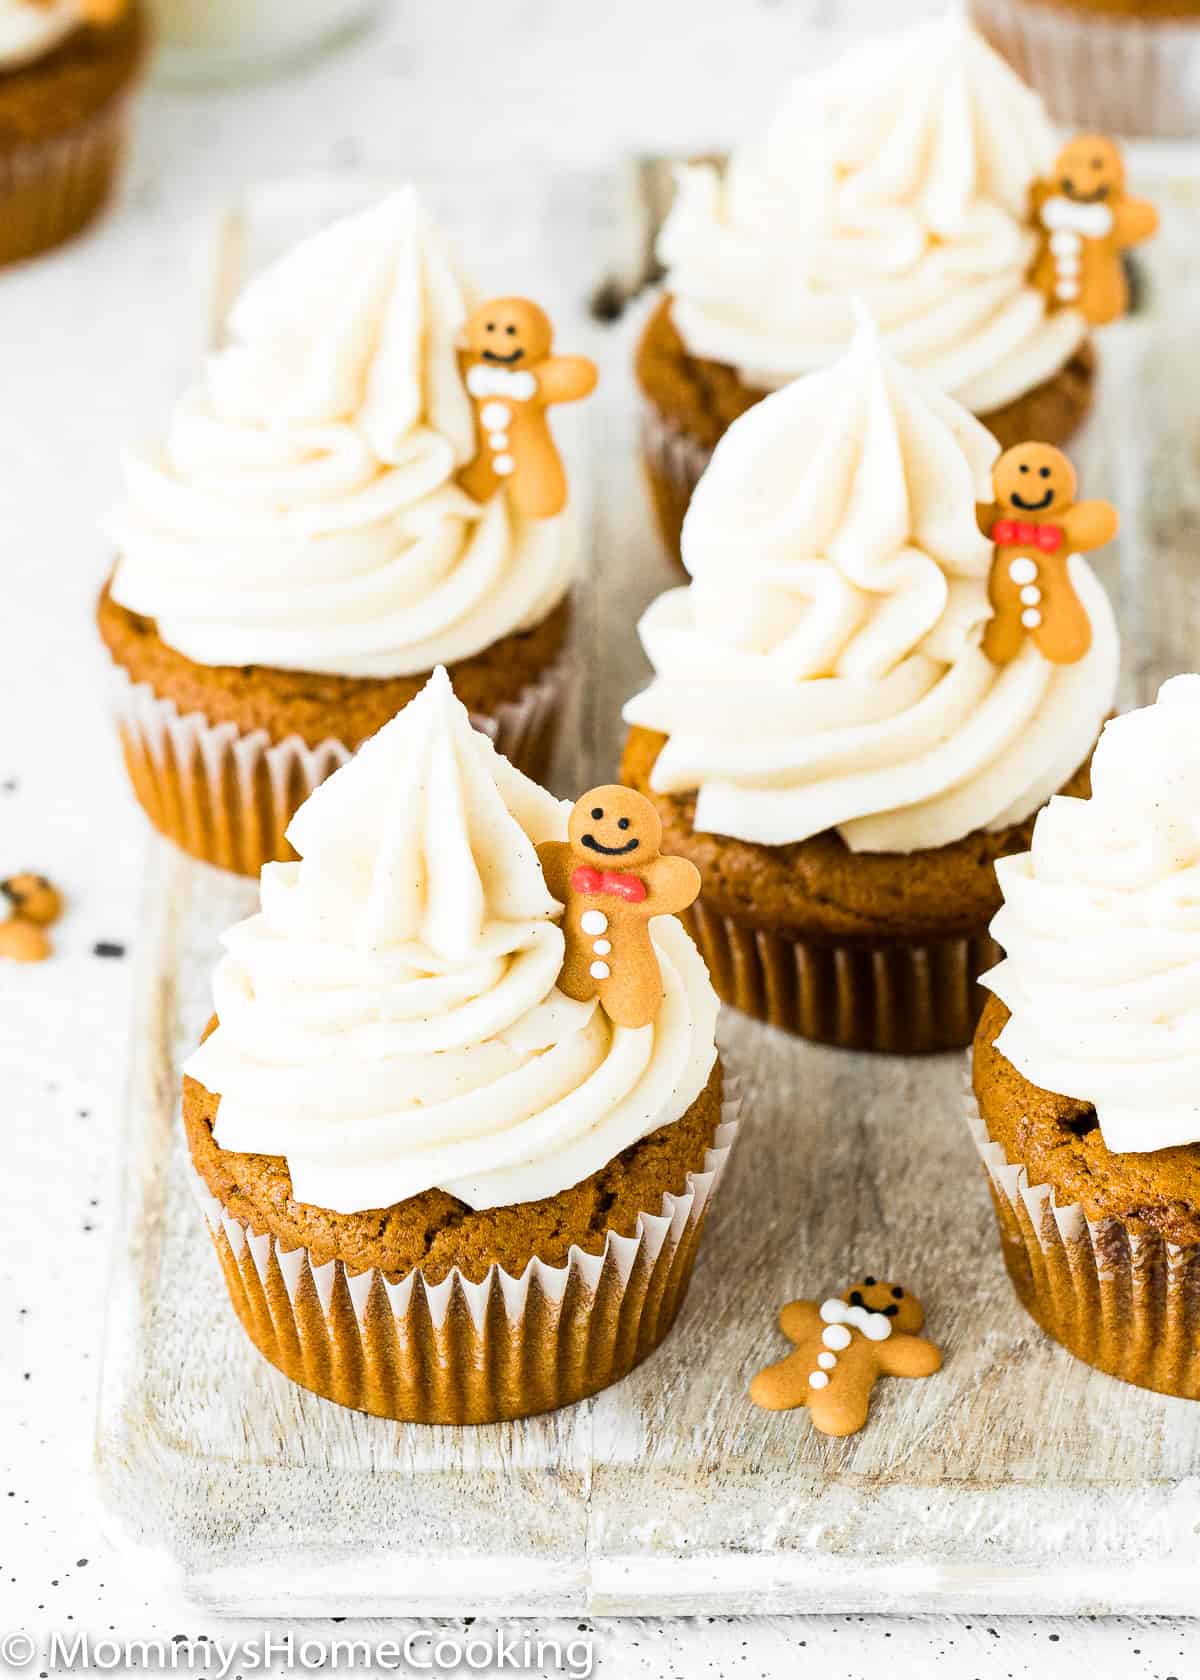 Eggless Gingerbread Cupcakes with cinnamon cream cheese frosting